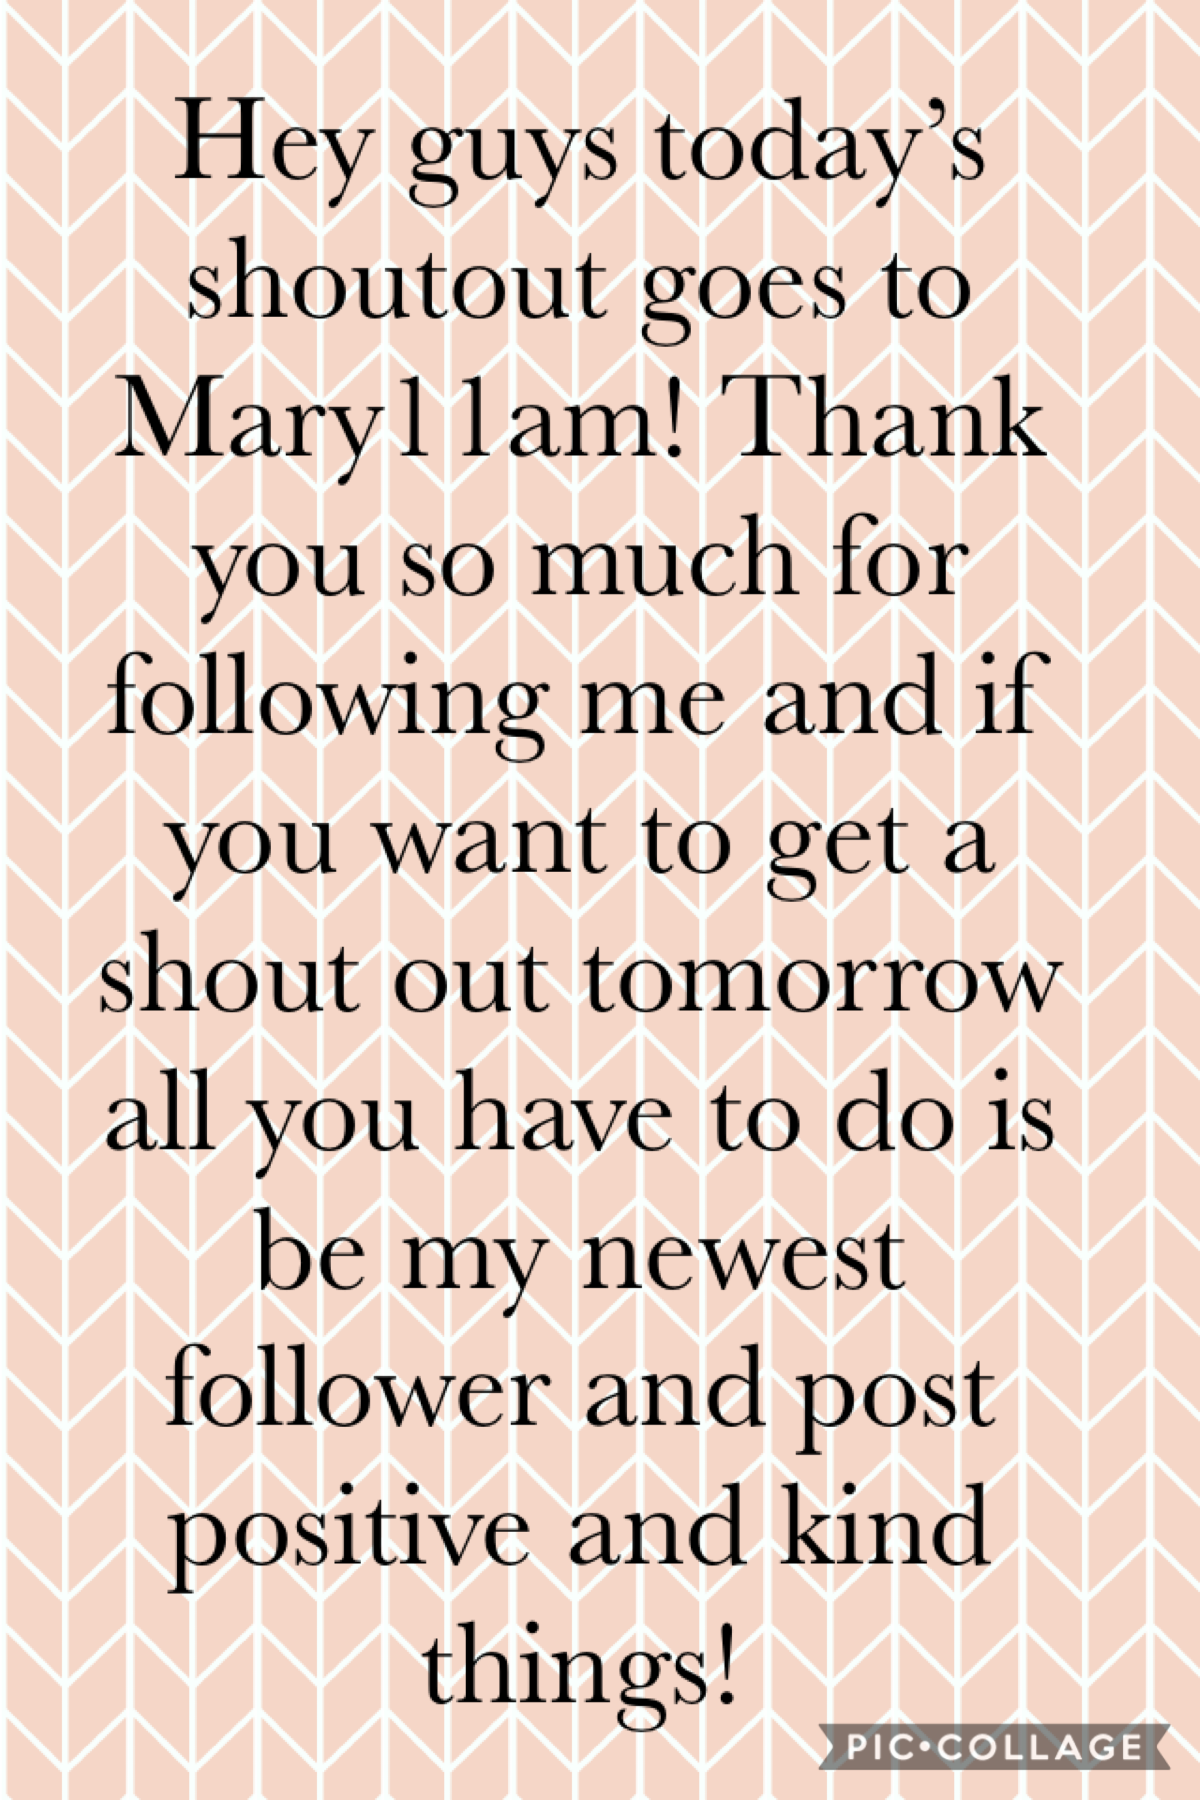 Thank you so much Mary11am for following me!